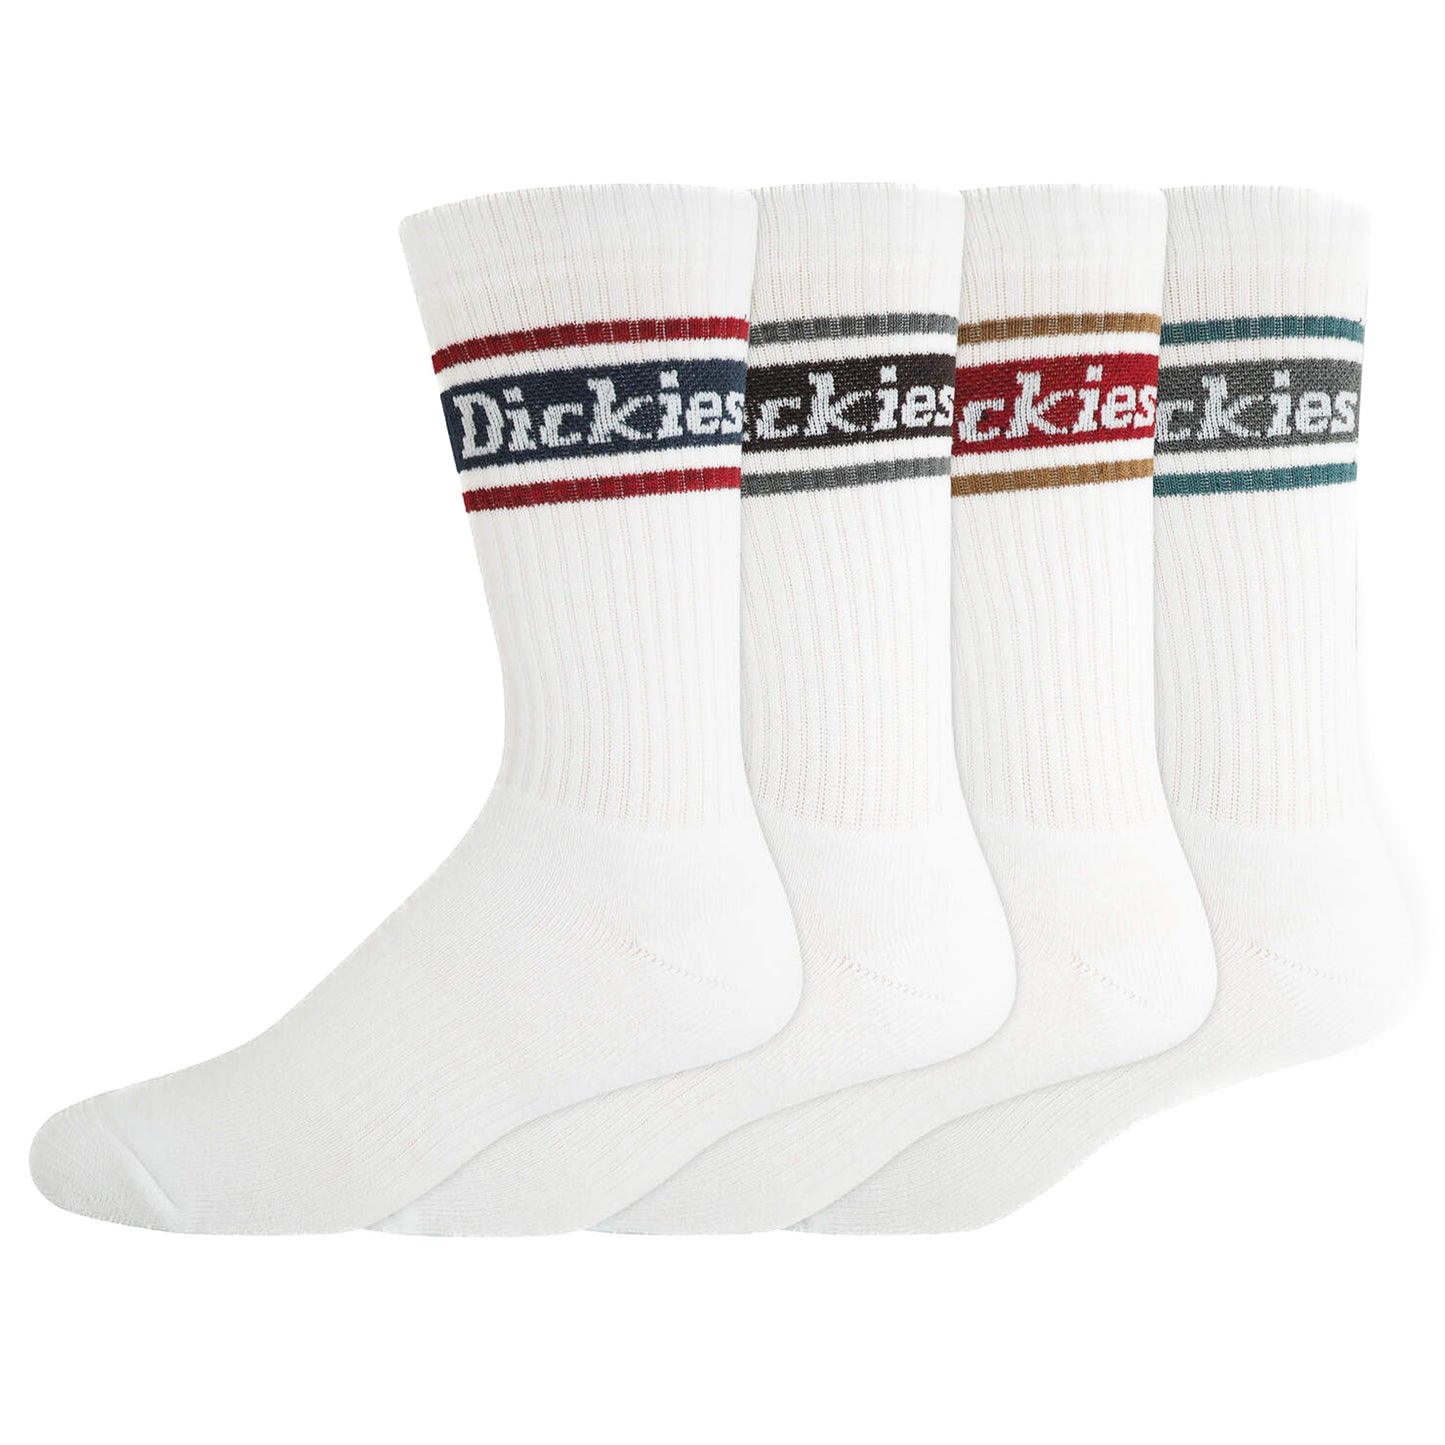 Dickies Rugby Stripe Sock Pack White Assortment